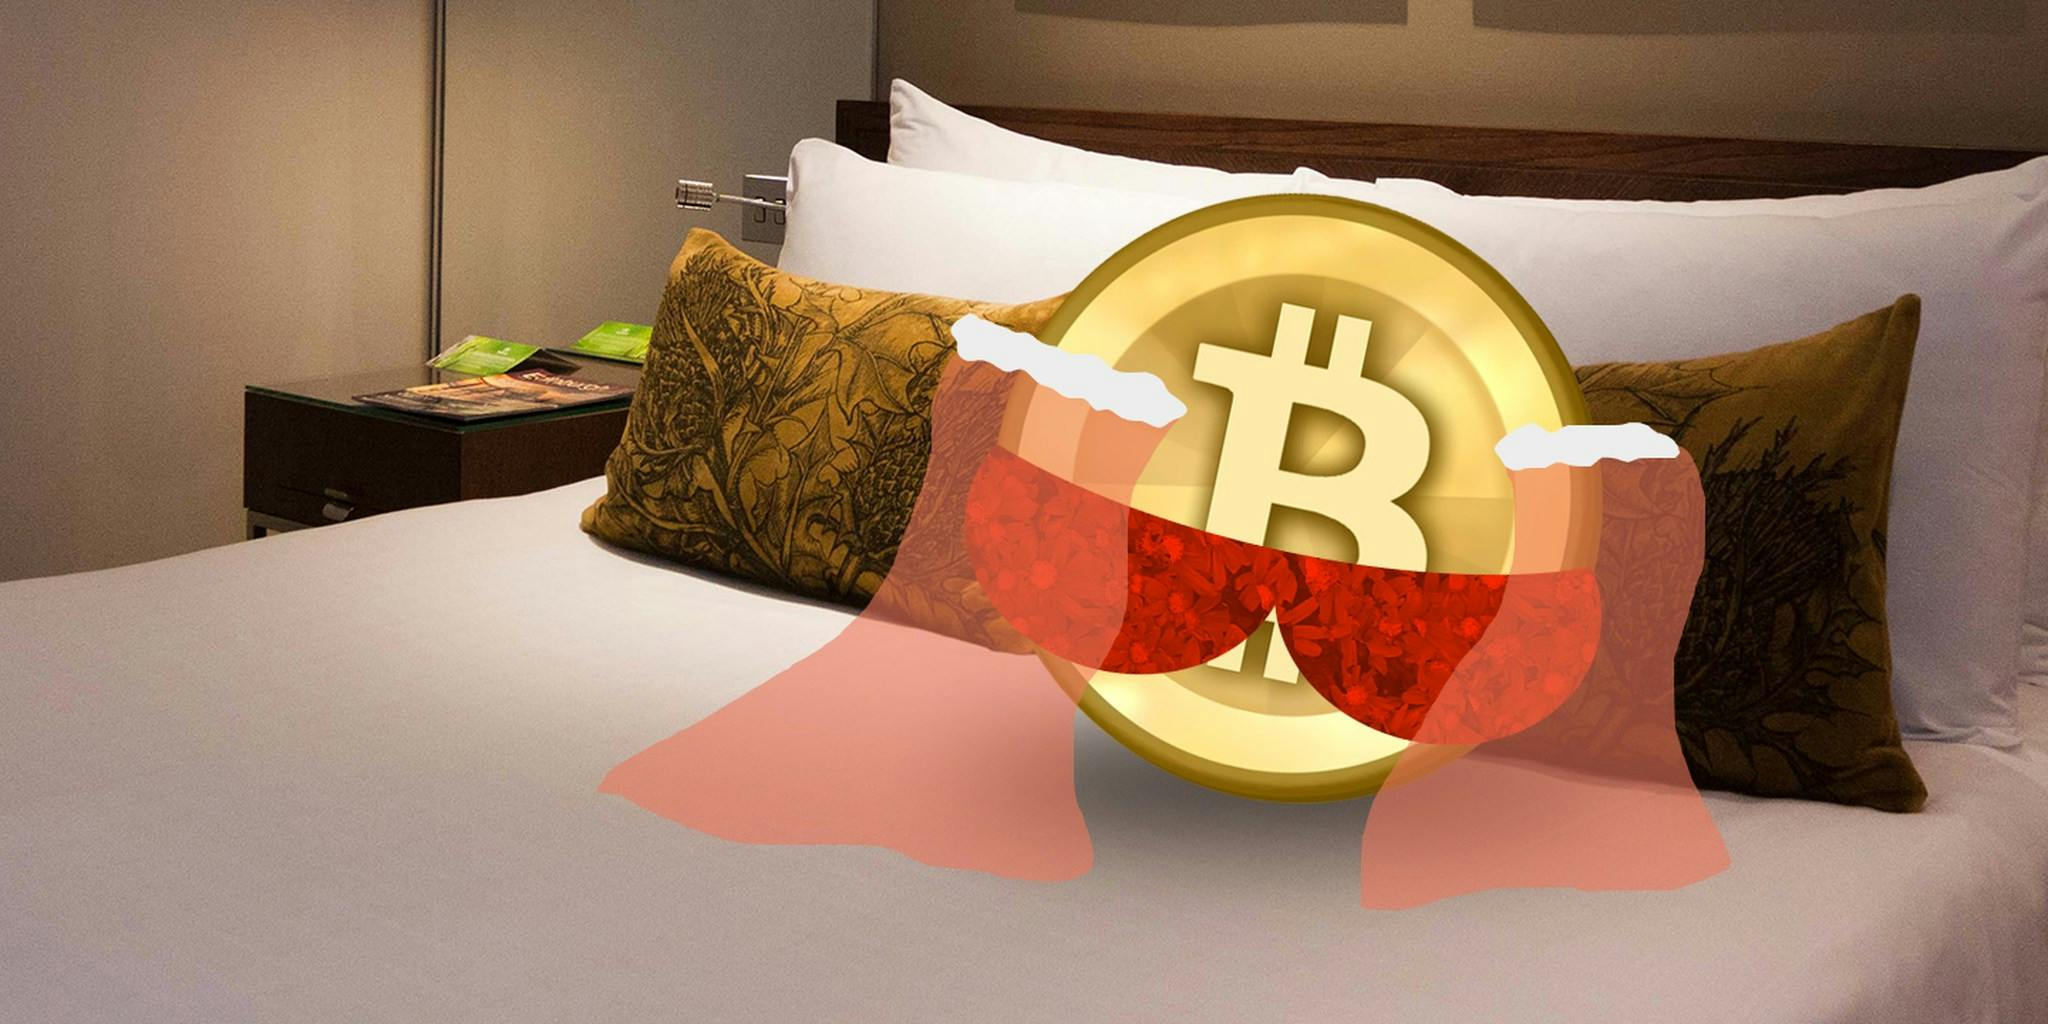 Why the porn industry is embracing Bitcoin